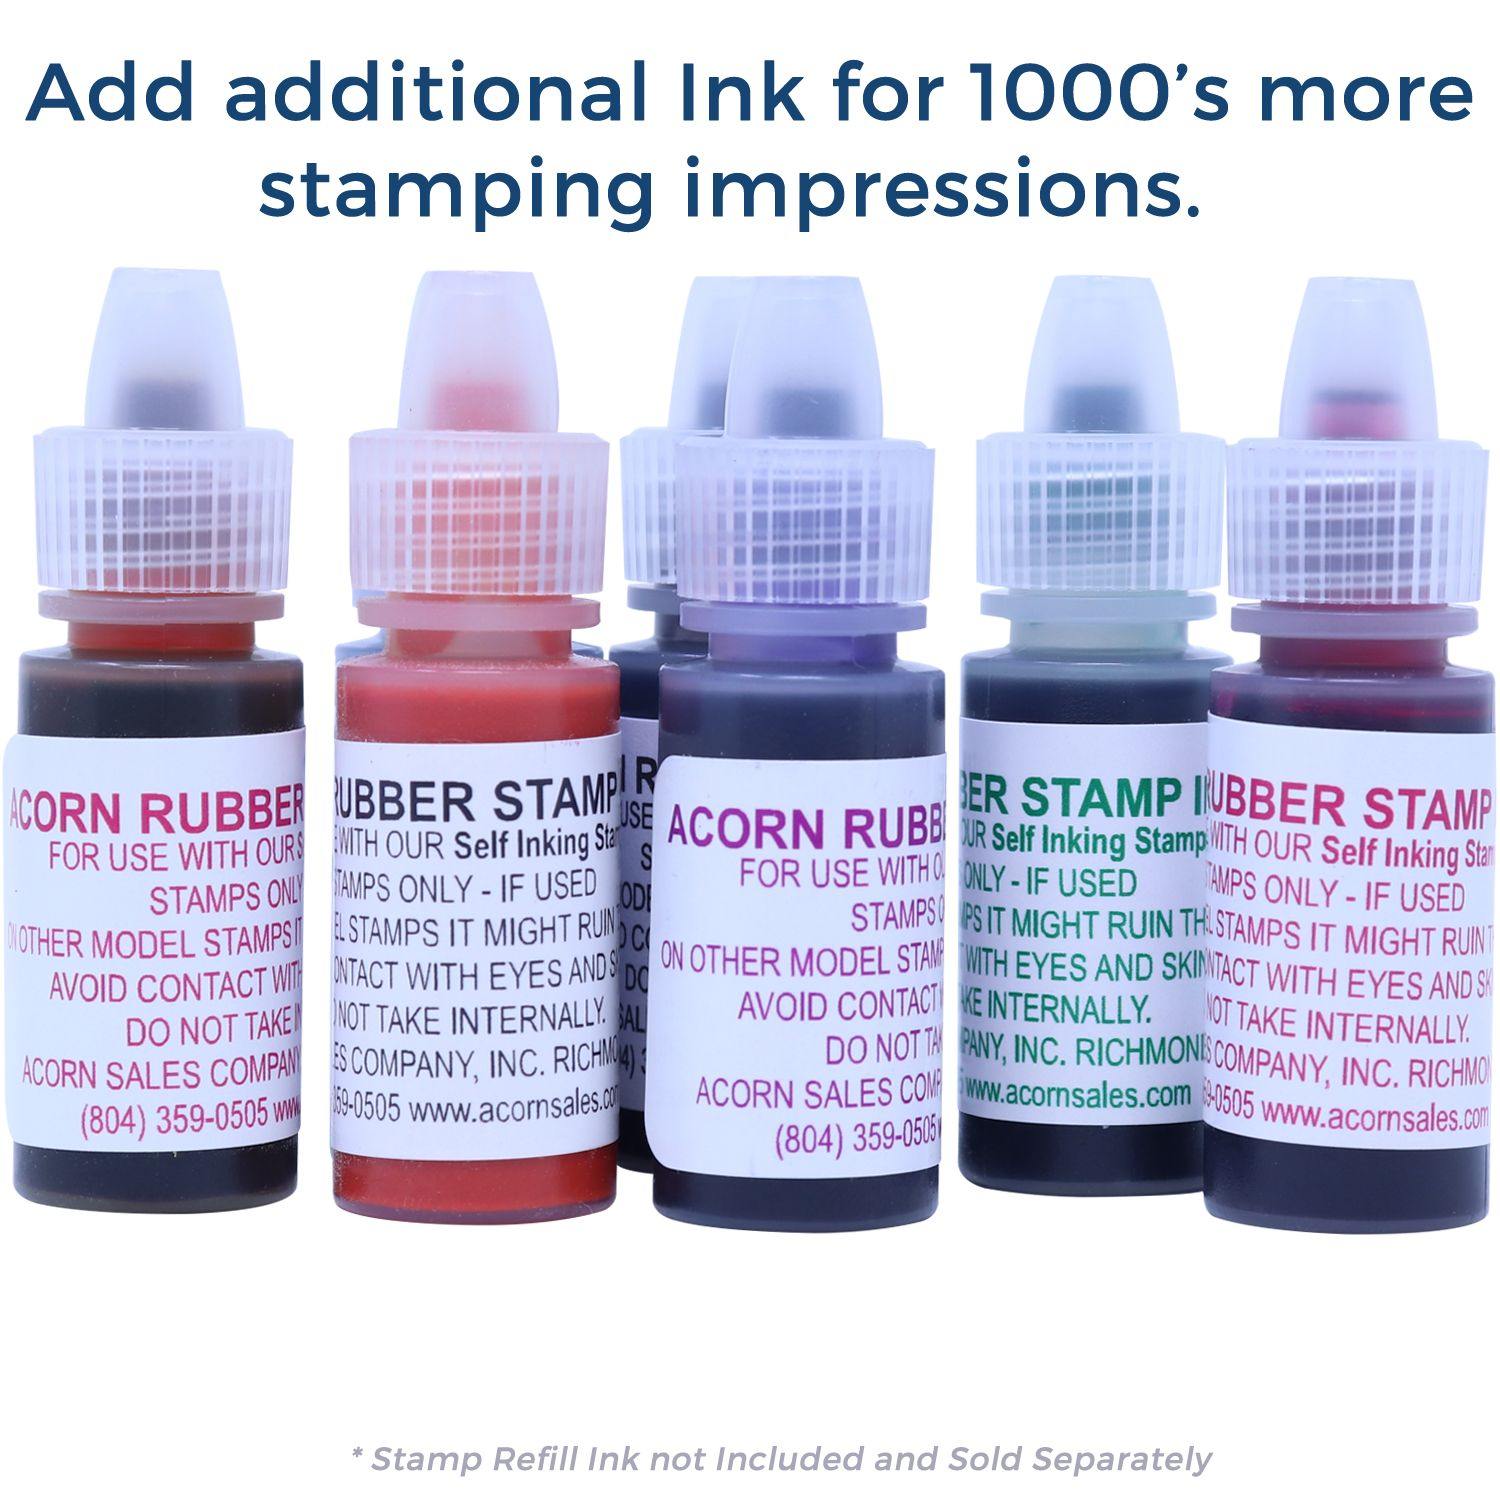 Slim Pre-Inked Cancelado with Box Stamp - Engineer Seal Stamps - Brand_Slim, Impression Size_Small, Stamp Type_Pre-Inked Stamp, Type of Use_Office, Type of Use_Shipping & Receiving